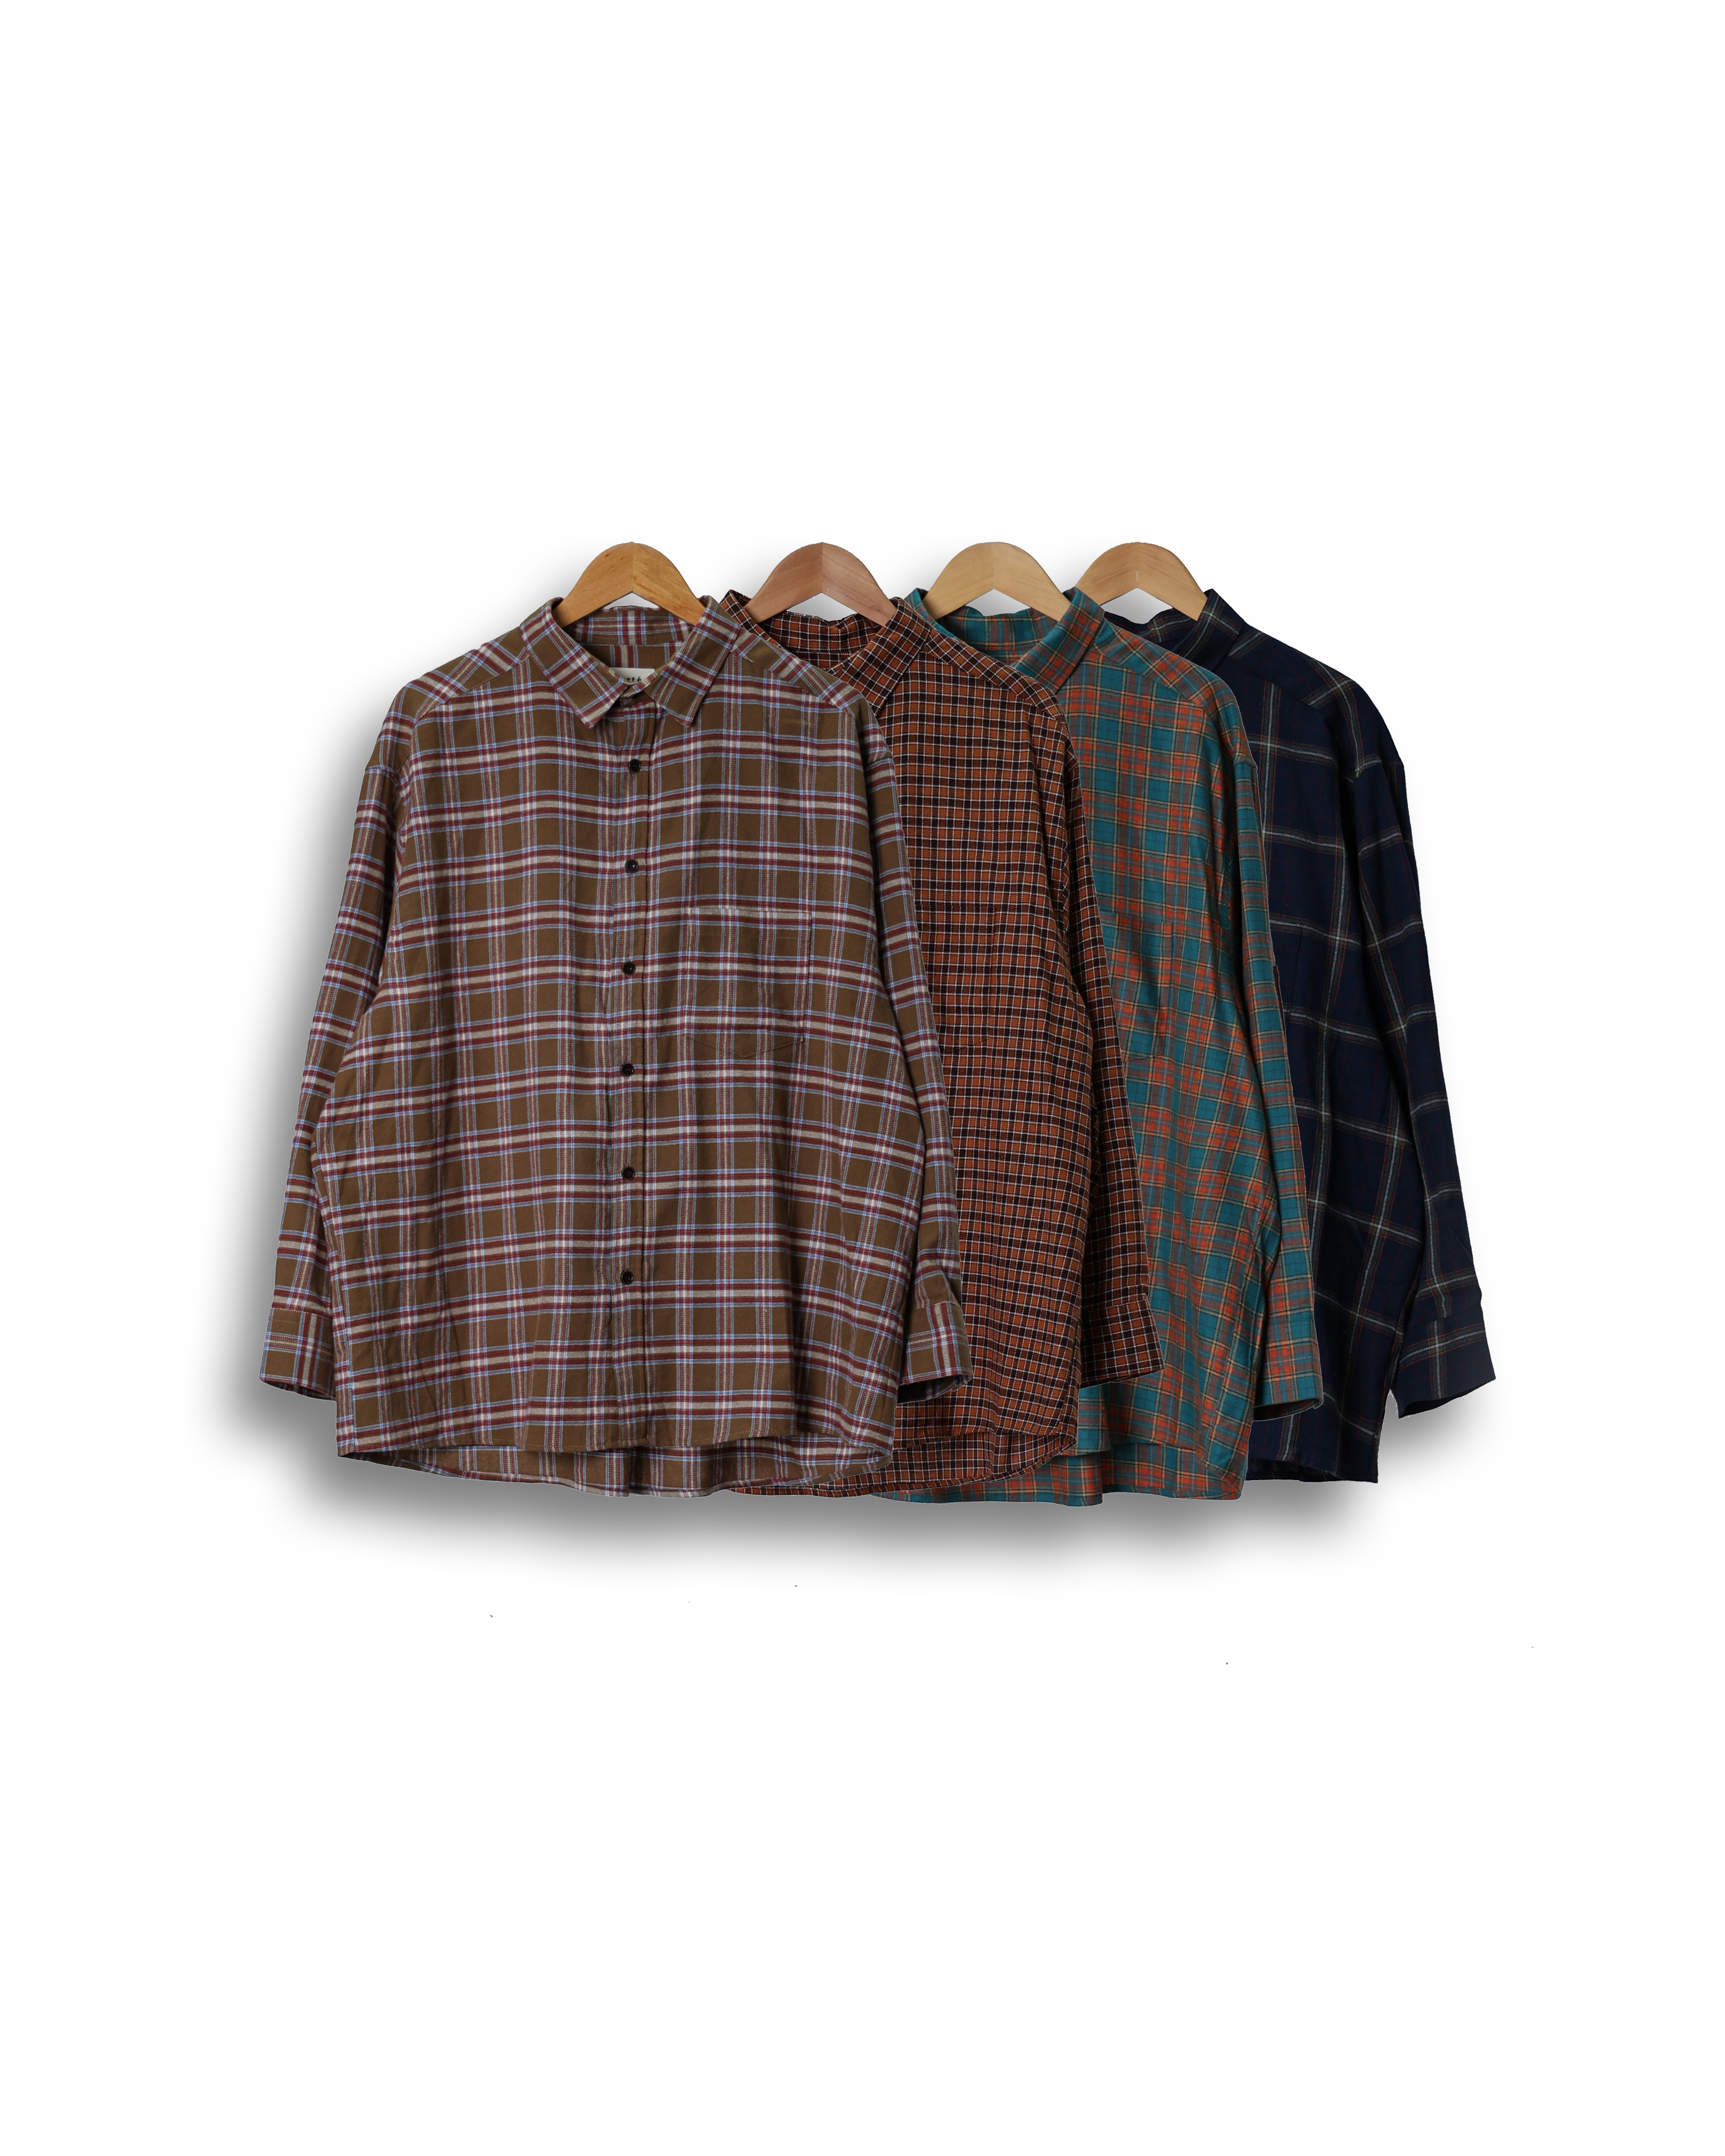 LIBERT RAY Patched Over Check Shirts (Navy/Green/Camel/Brown)